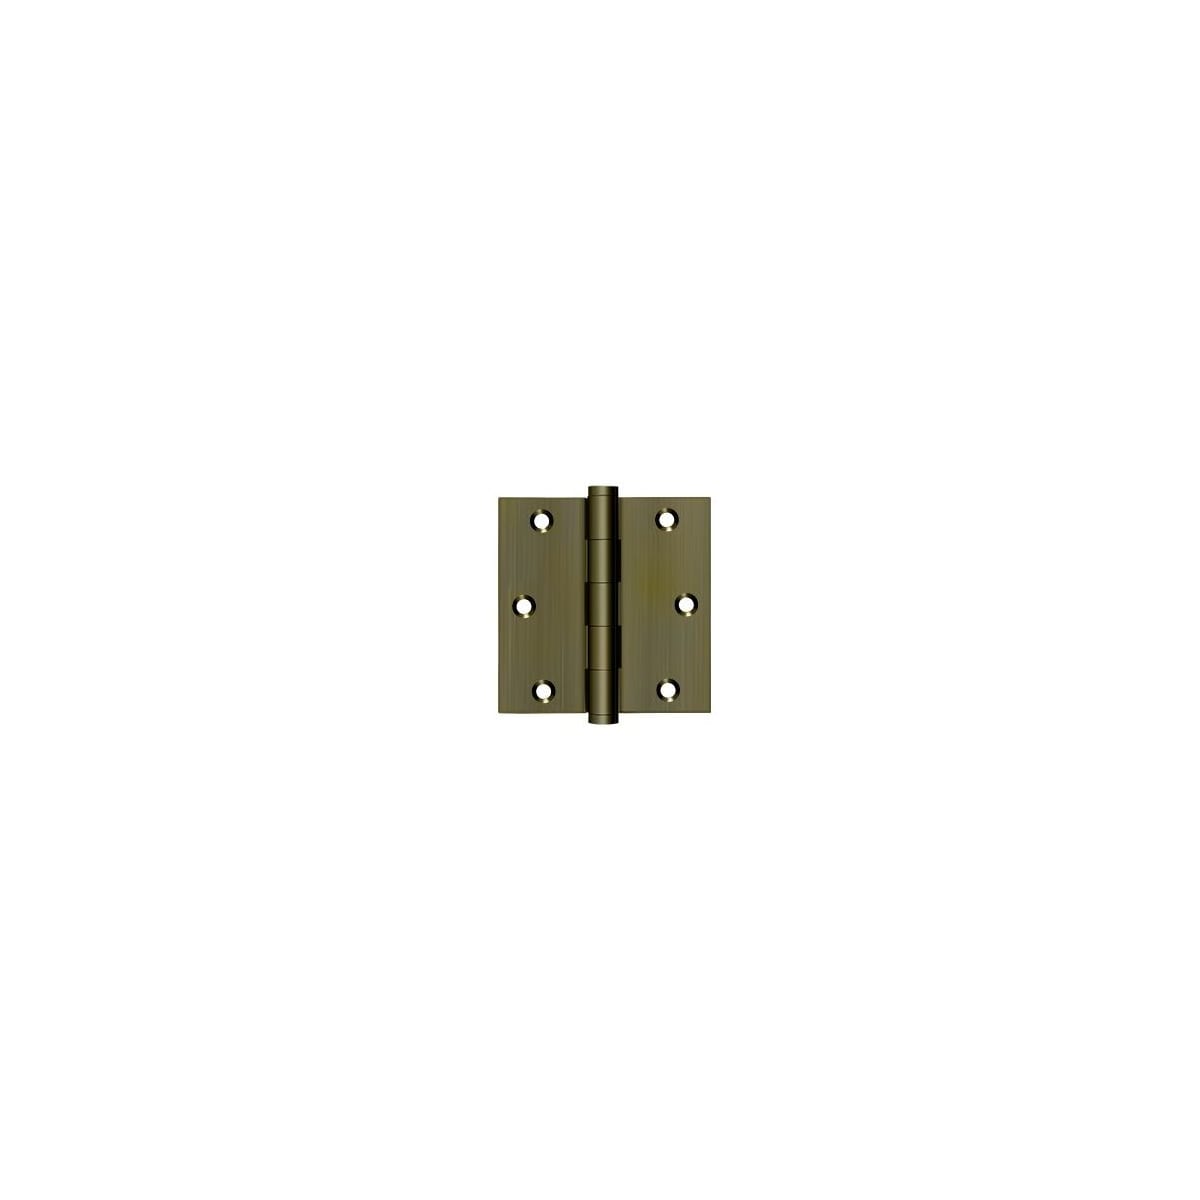 Deltana DSB3526-R Residential Solid Brass 3 1/2-Inch x 3 1/2-Inch Square Hinge 